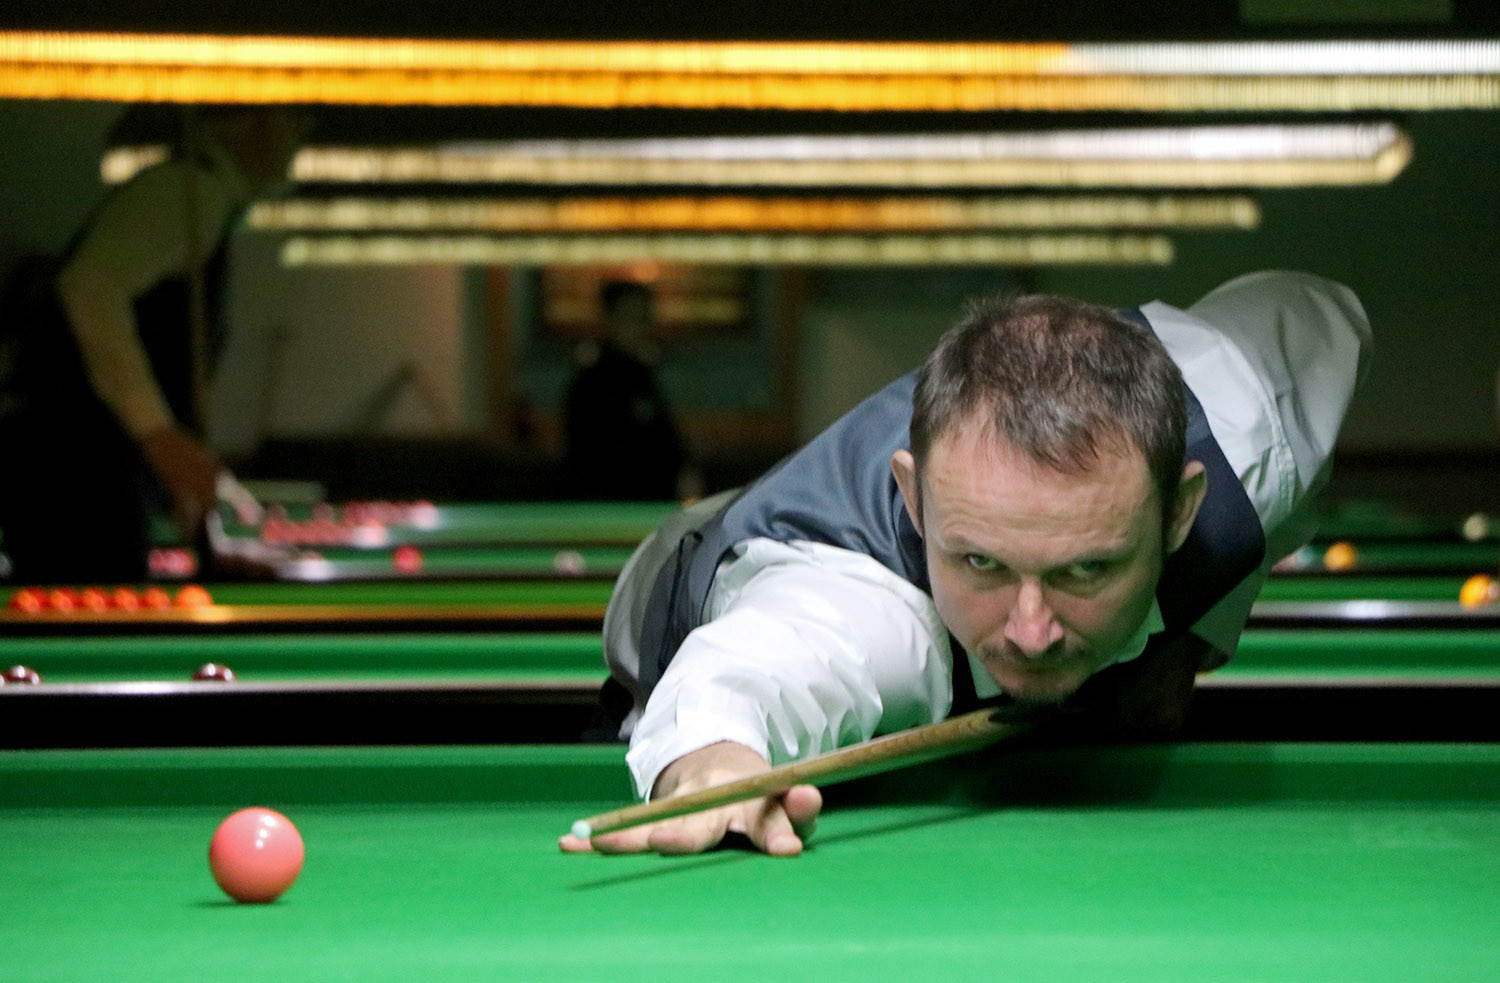 Coventry's Nick Neale will represent sensory disabilities at the World Disability Billiards and Snooker Tour event at the Crucible Theatre in Sheffield in August ©WDBS